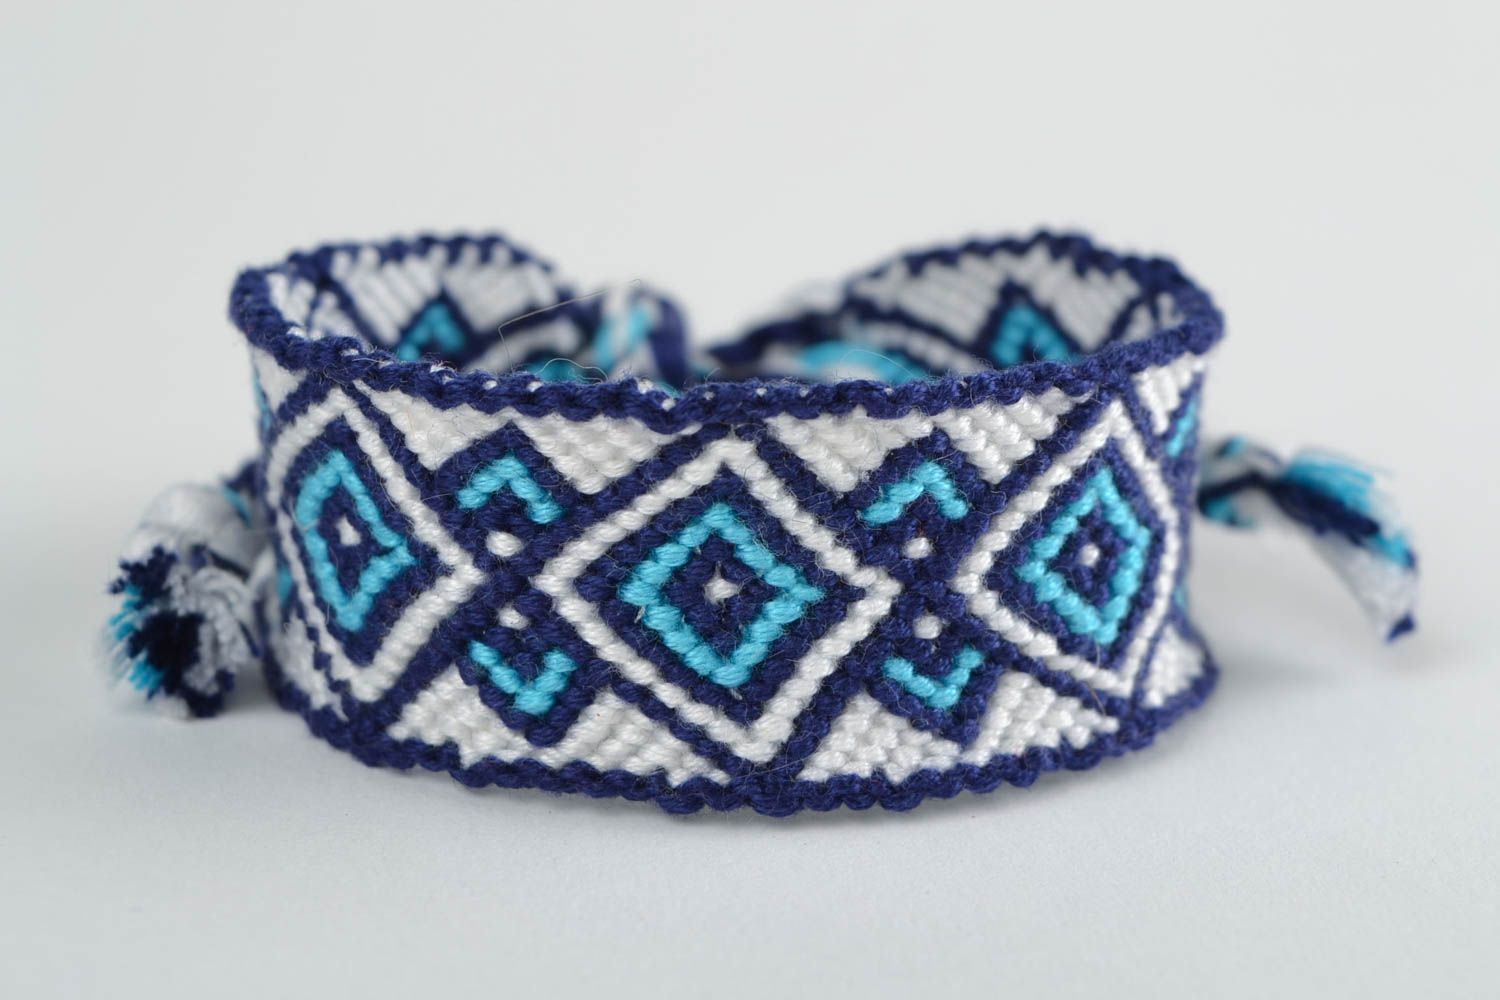 Handmade macrame bracelet woven of white and blue embroidery floss with ornament photo 3